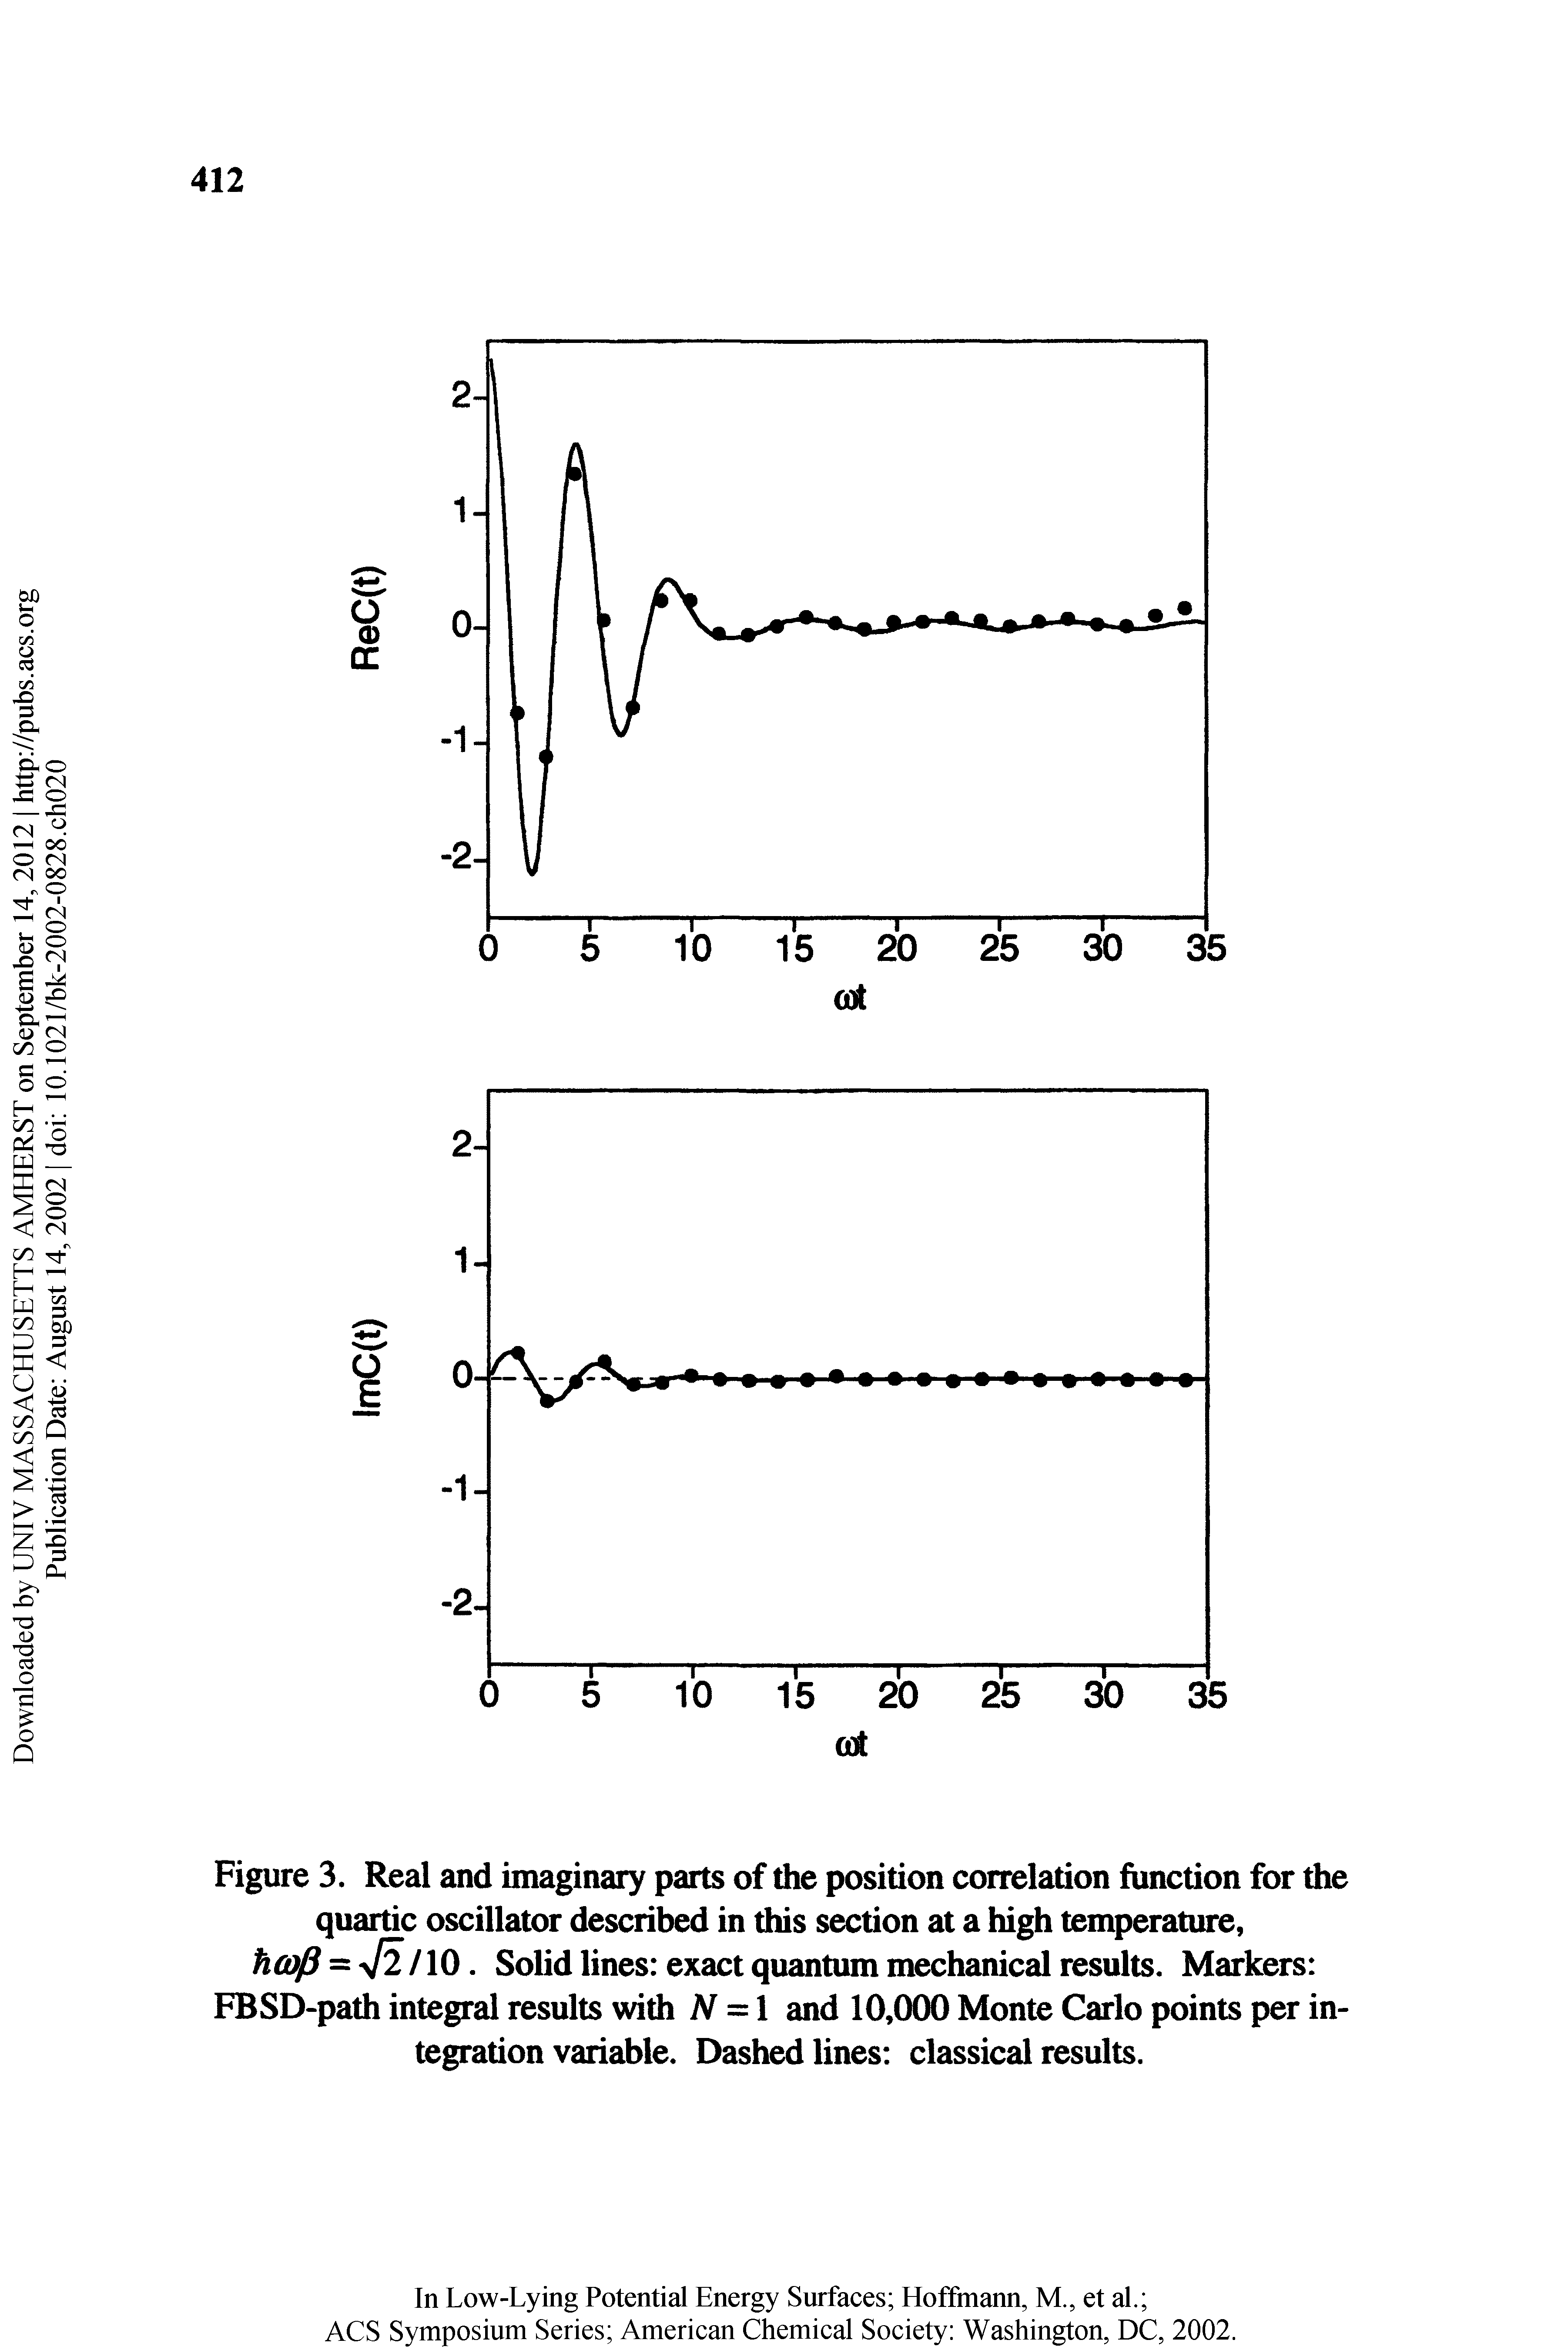 Figure 3. Real and imaginary parts of the position correlation function for the quartic oscillator described in this section at a high temperature, h(op-ypil Q, Solid lines exact quantum mechanical results. Markers FBSD-path integral results with iV = 1 and 10,000 Monte Carlo points per integration variable. Dashed lines classical results.